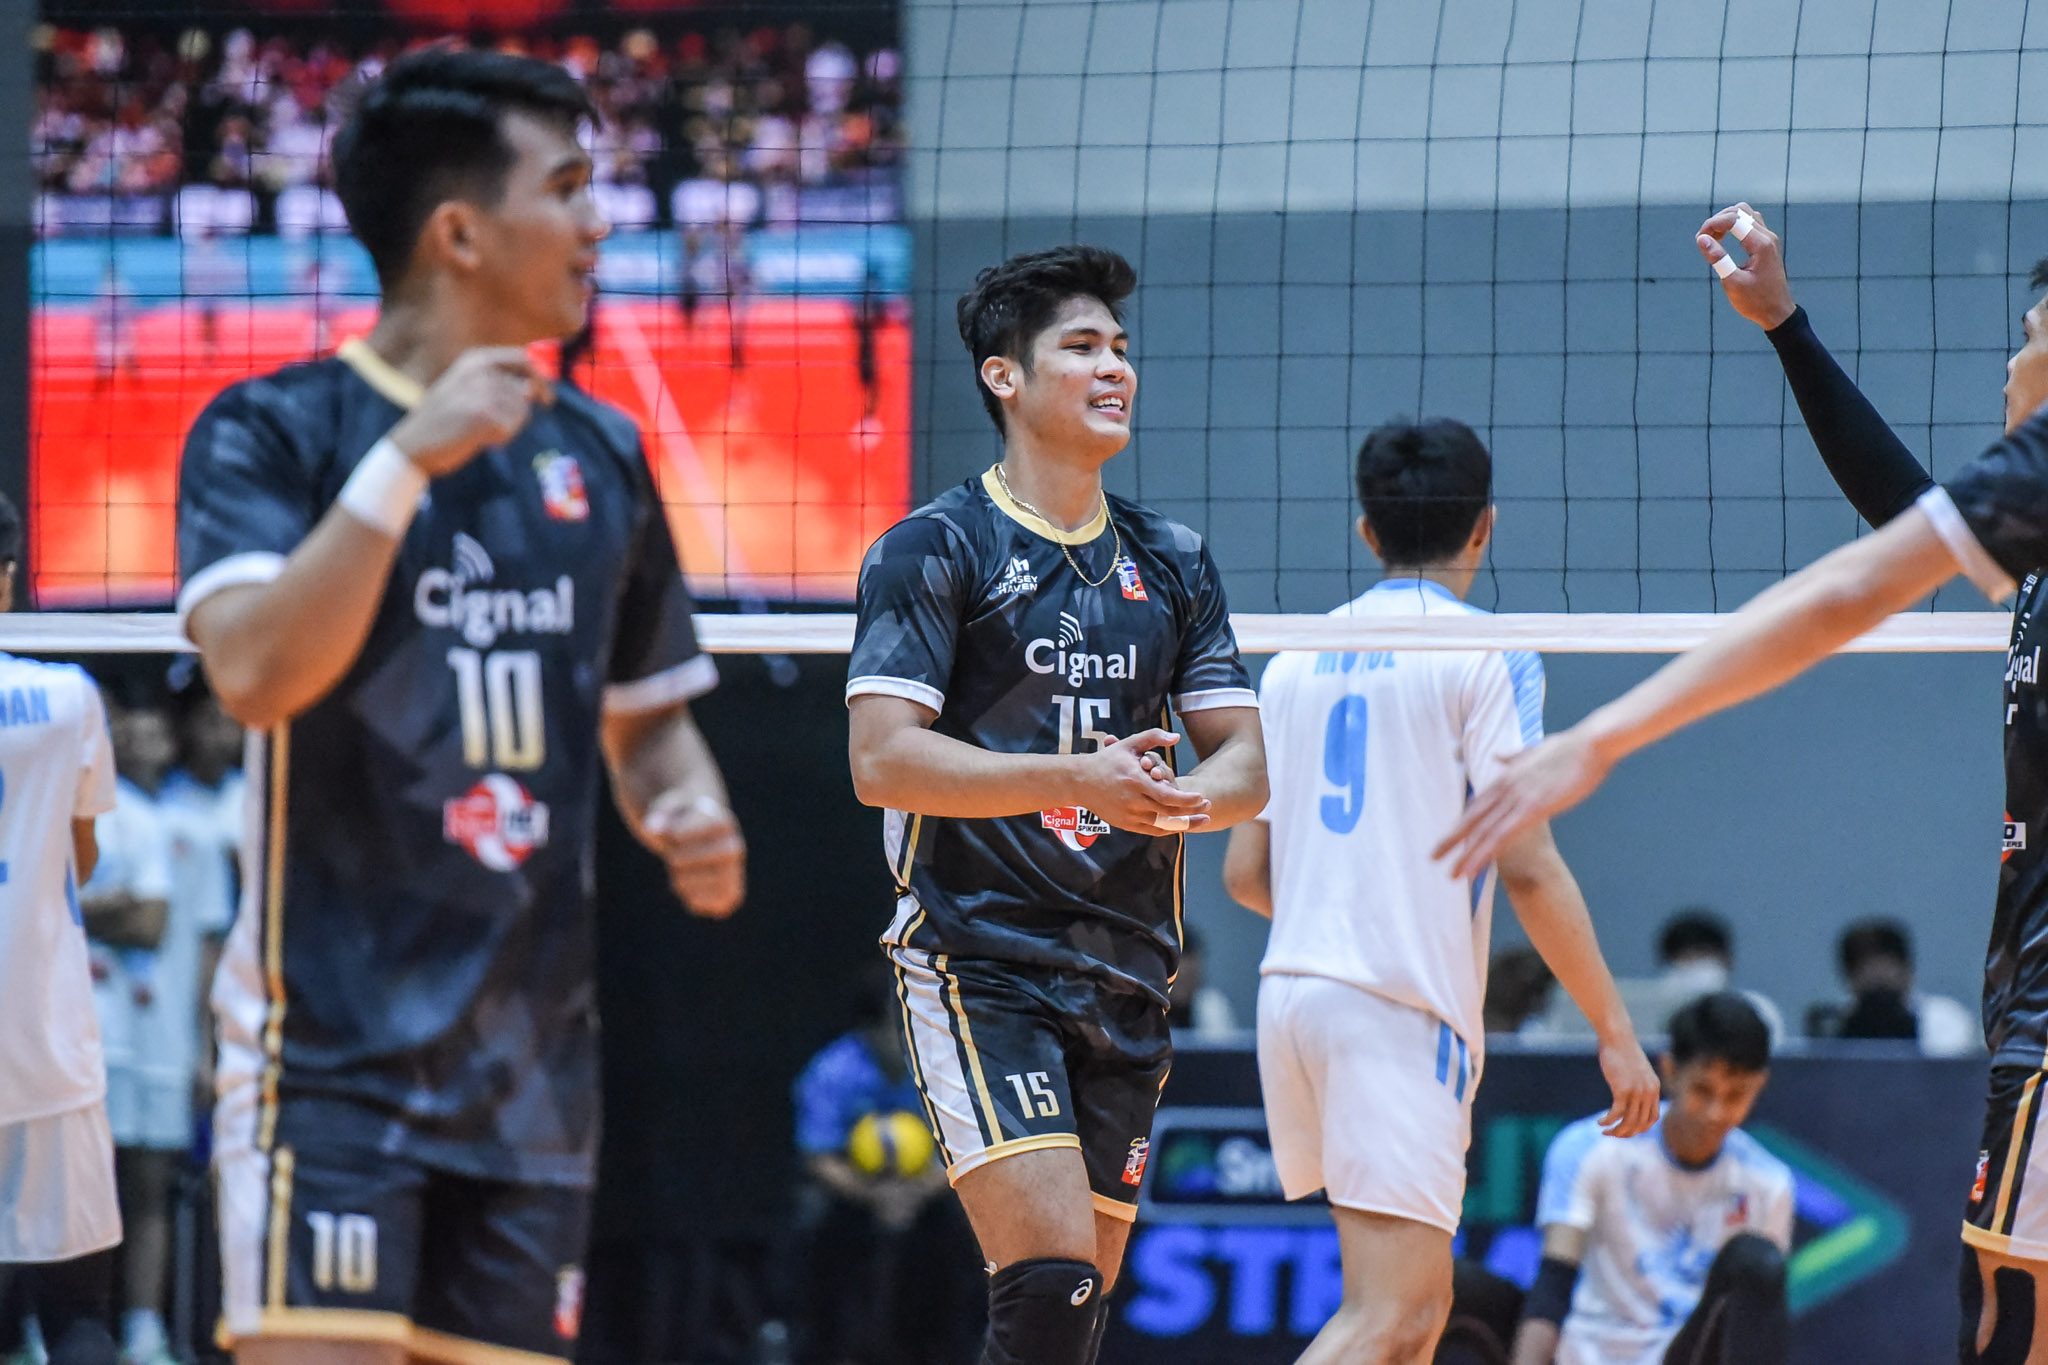 Spikers’ Turf: Cignal cruises to 5th straight sweep; Navy grounds Air Force